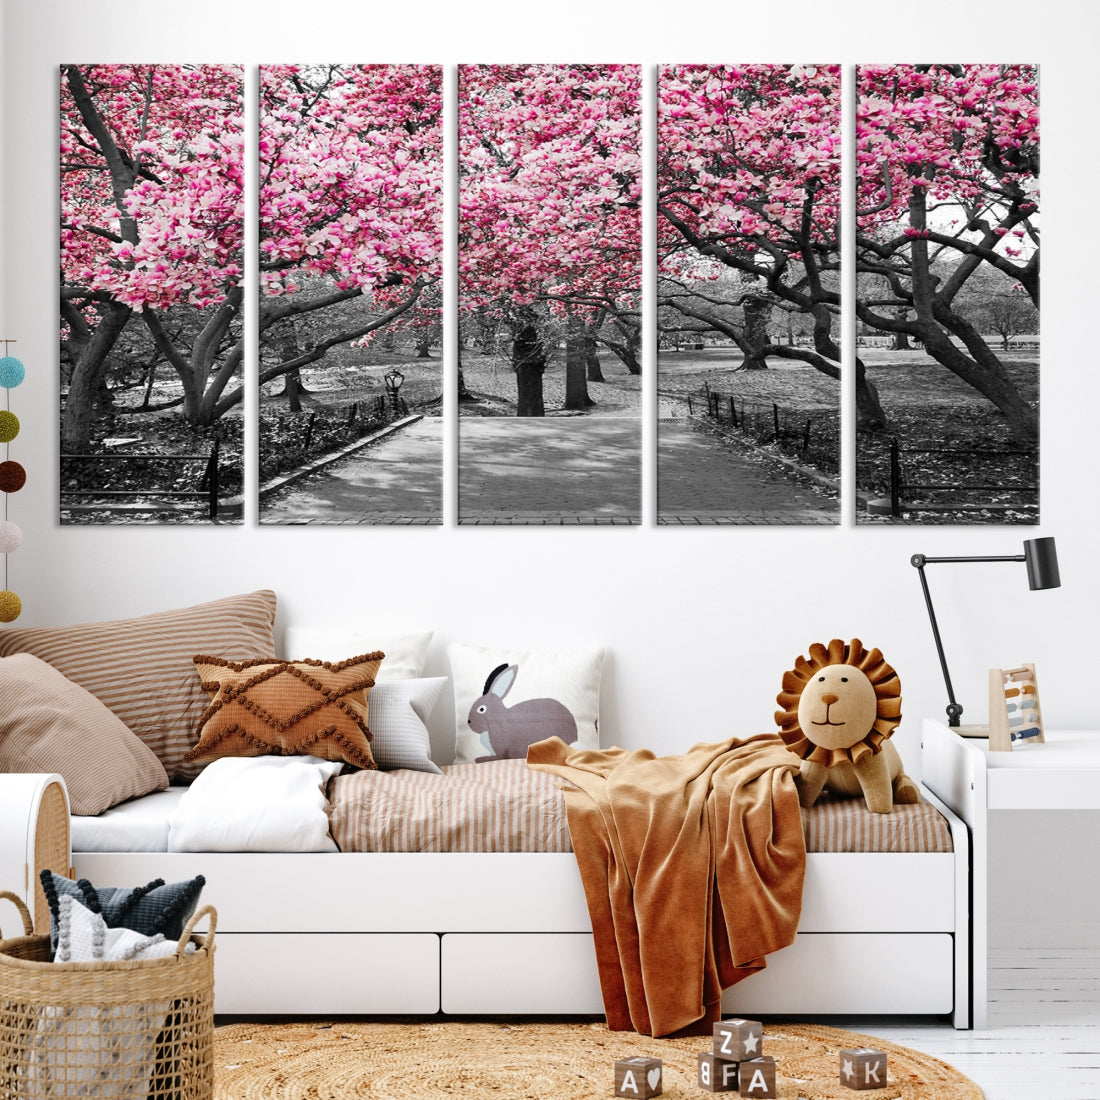 Large Pink Trees Black and White Landscape Nature Wall Art Canvas Print